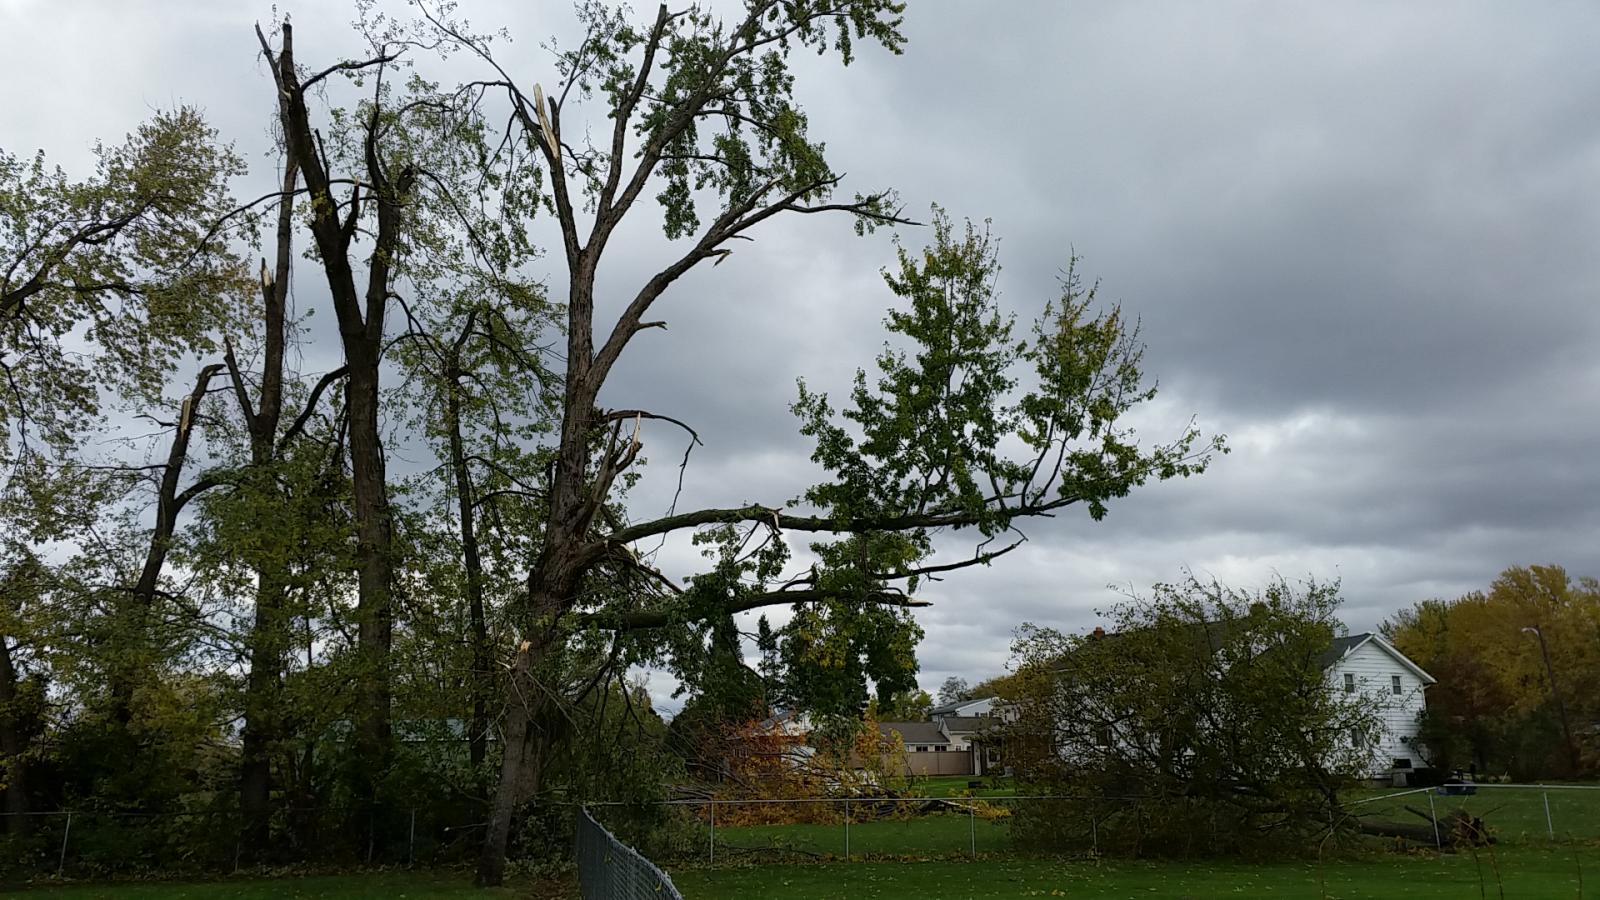 Trees snapped from Milcreek PA Tornado, November 5 2017